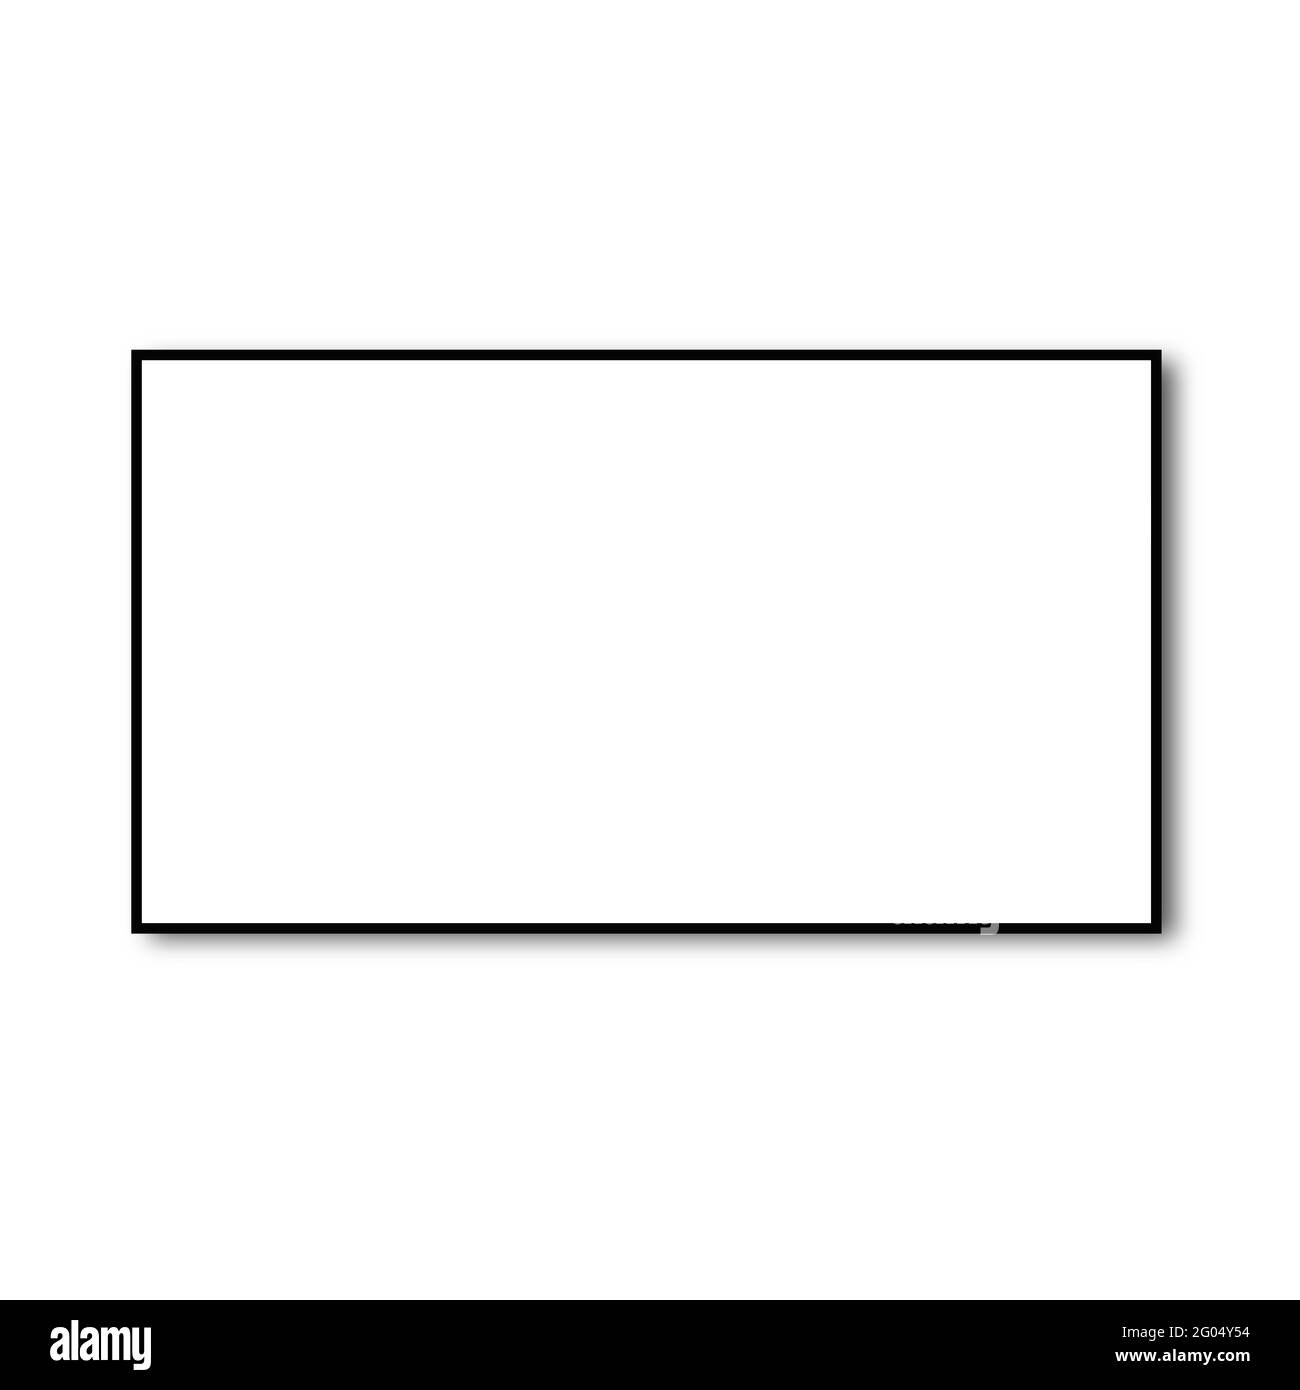 One Horizontal rectangular blank foto frame with black borders, Picture template ready for image mockup. Pure empty White blank with shadow. 3D Stock Photo